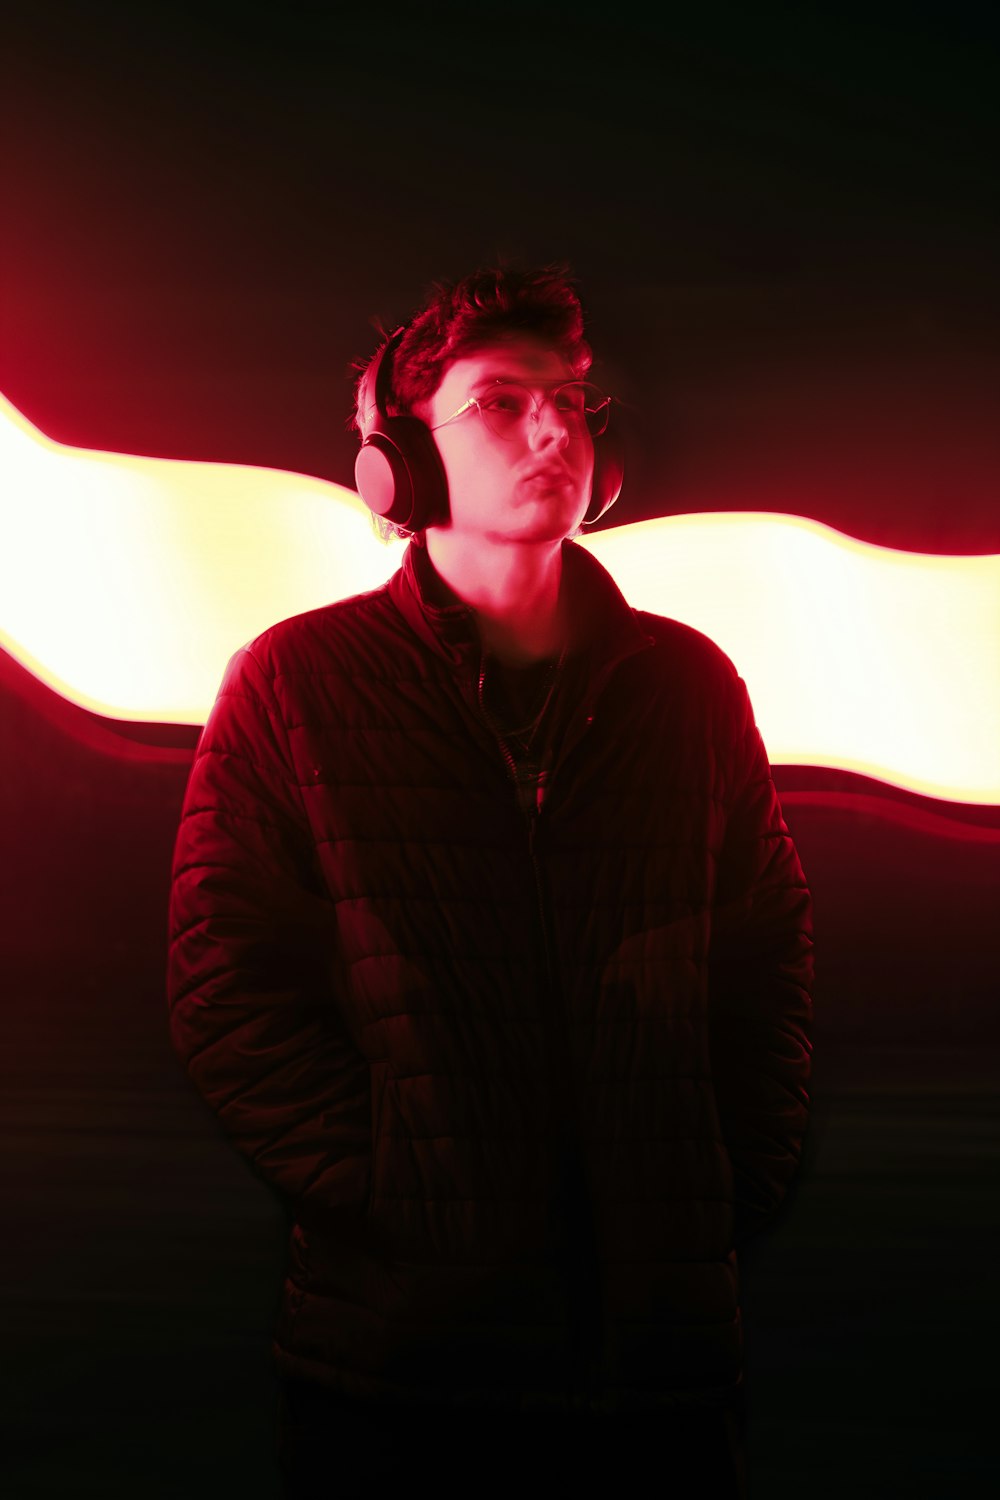 a man wearing headphones standing in front of a red light